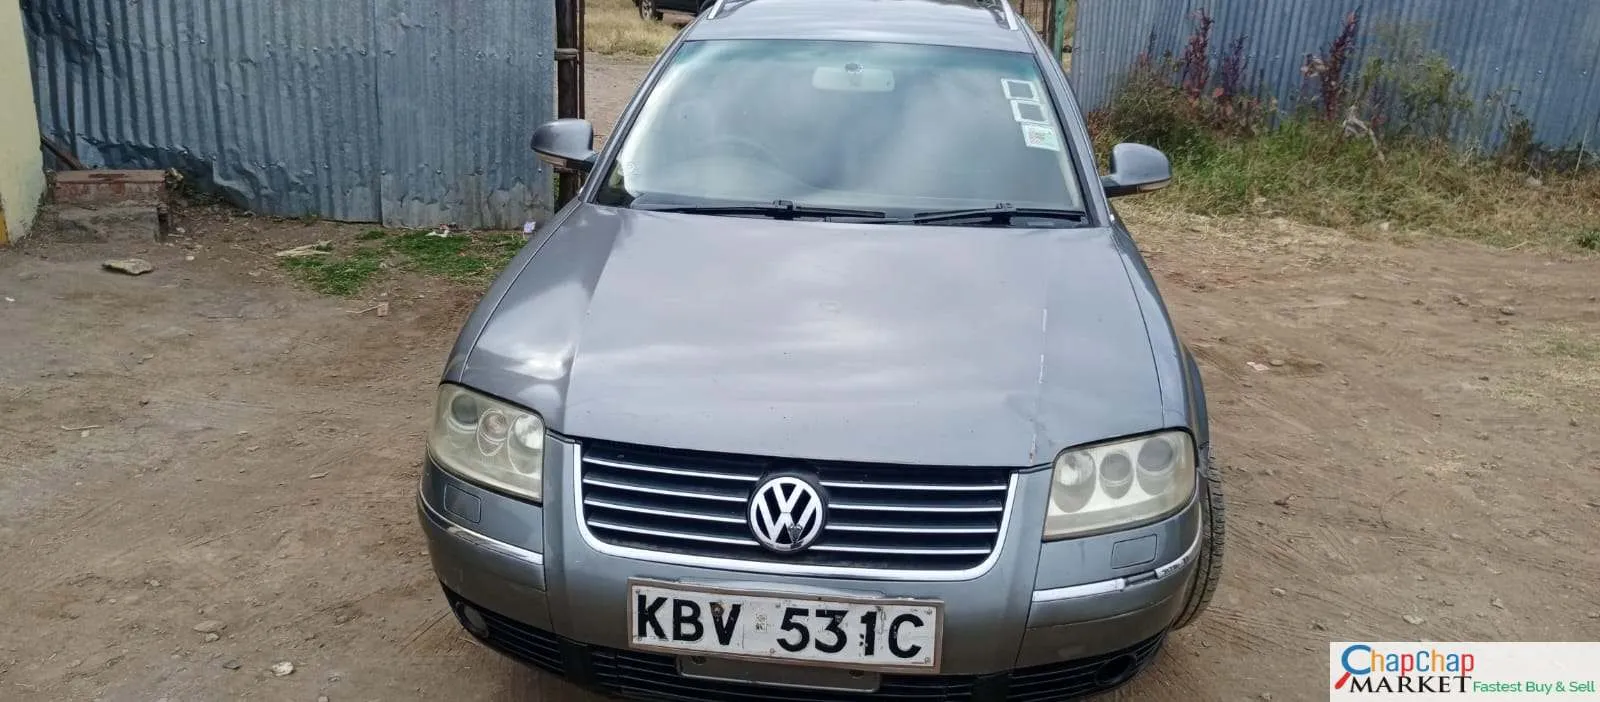 Volkswagen Passat for sale in Kenya QUICK SALE 🔥 You Pay 30% Deposit Trade in Ok EXCLUSIVE hire purchase installments bank finance